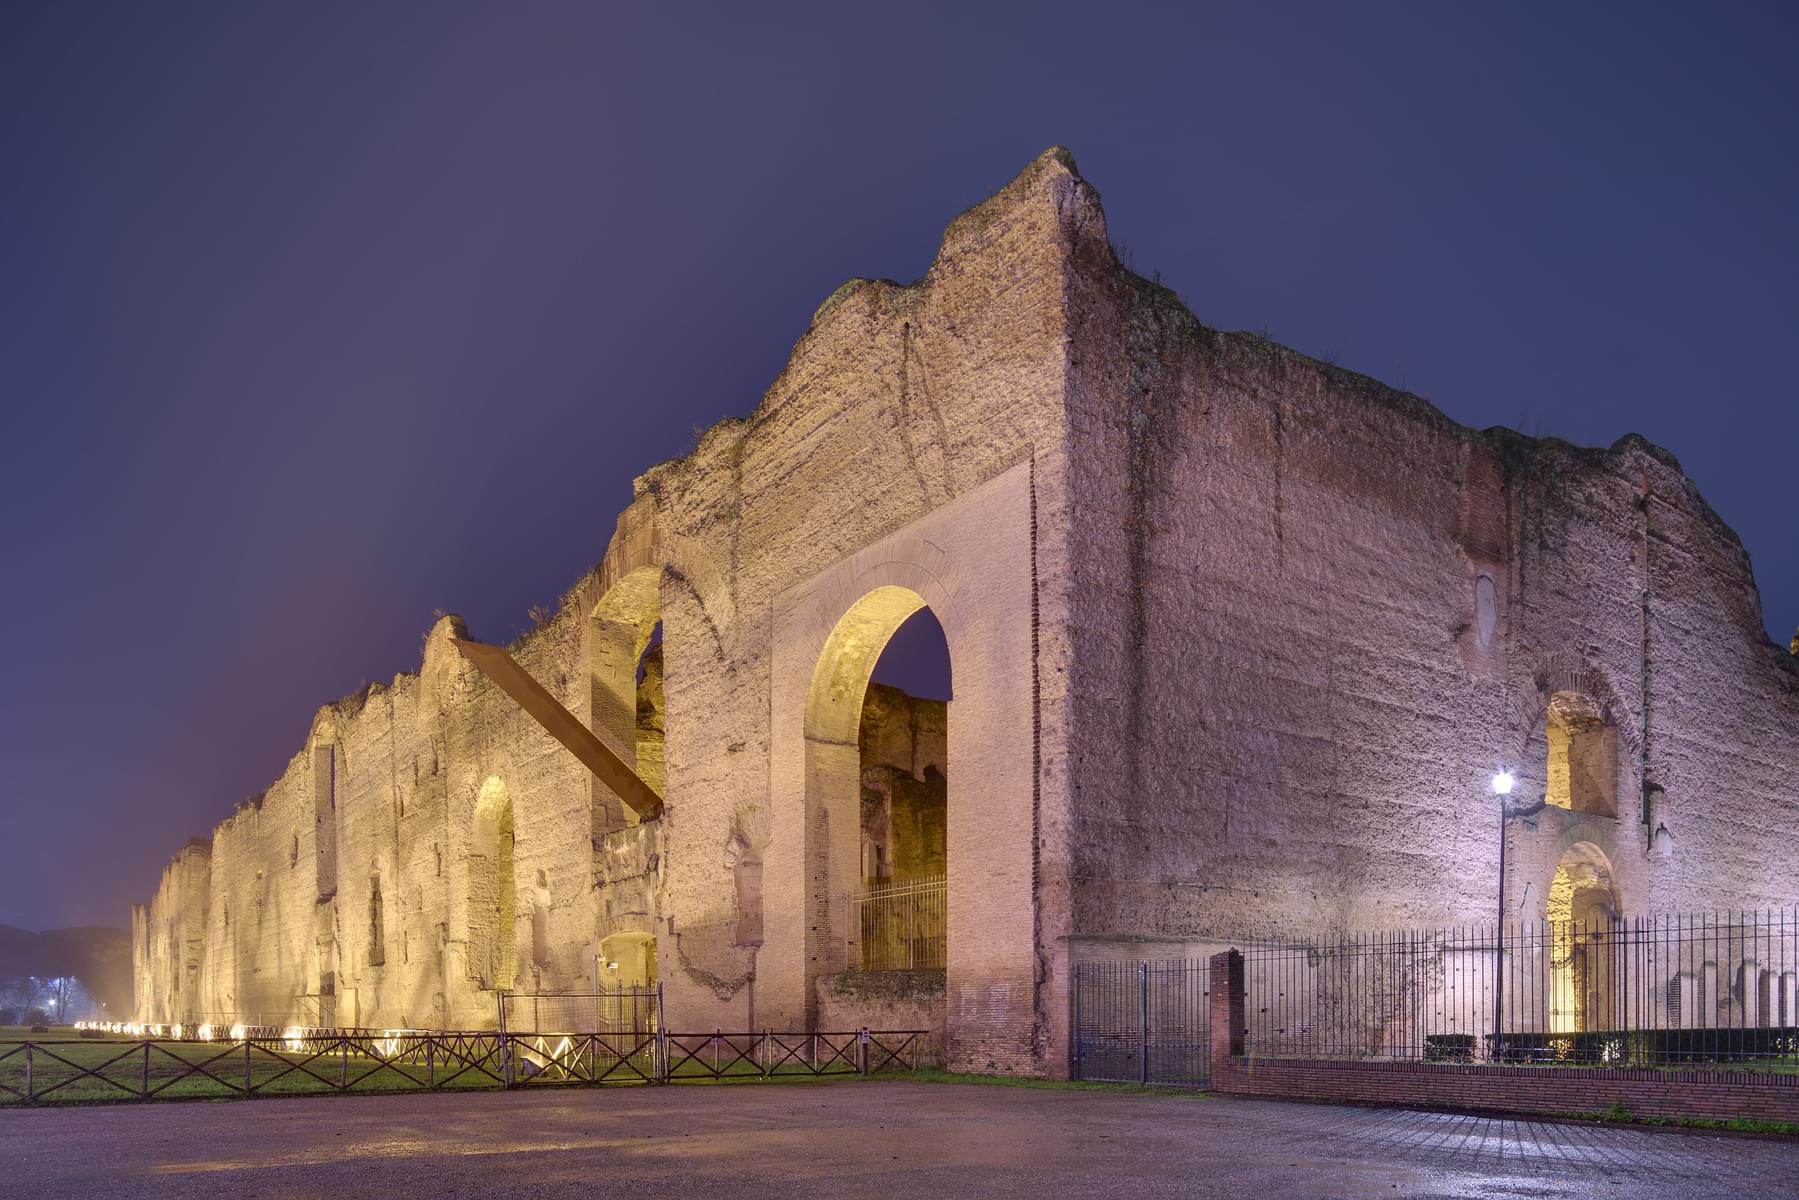 History of The Baths of Caracalla